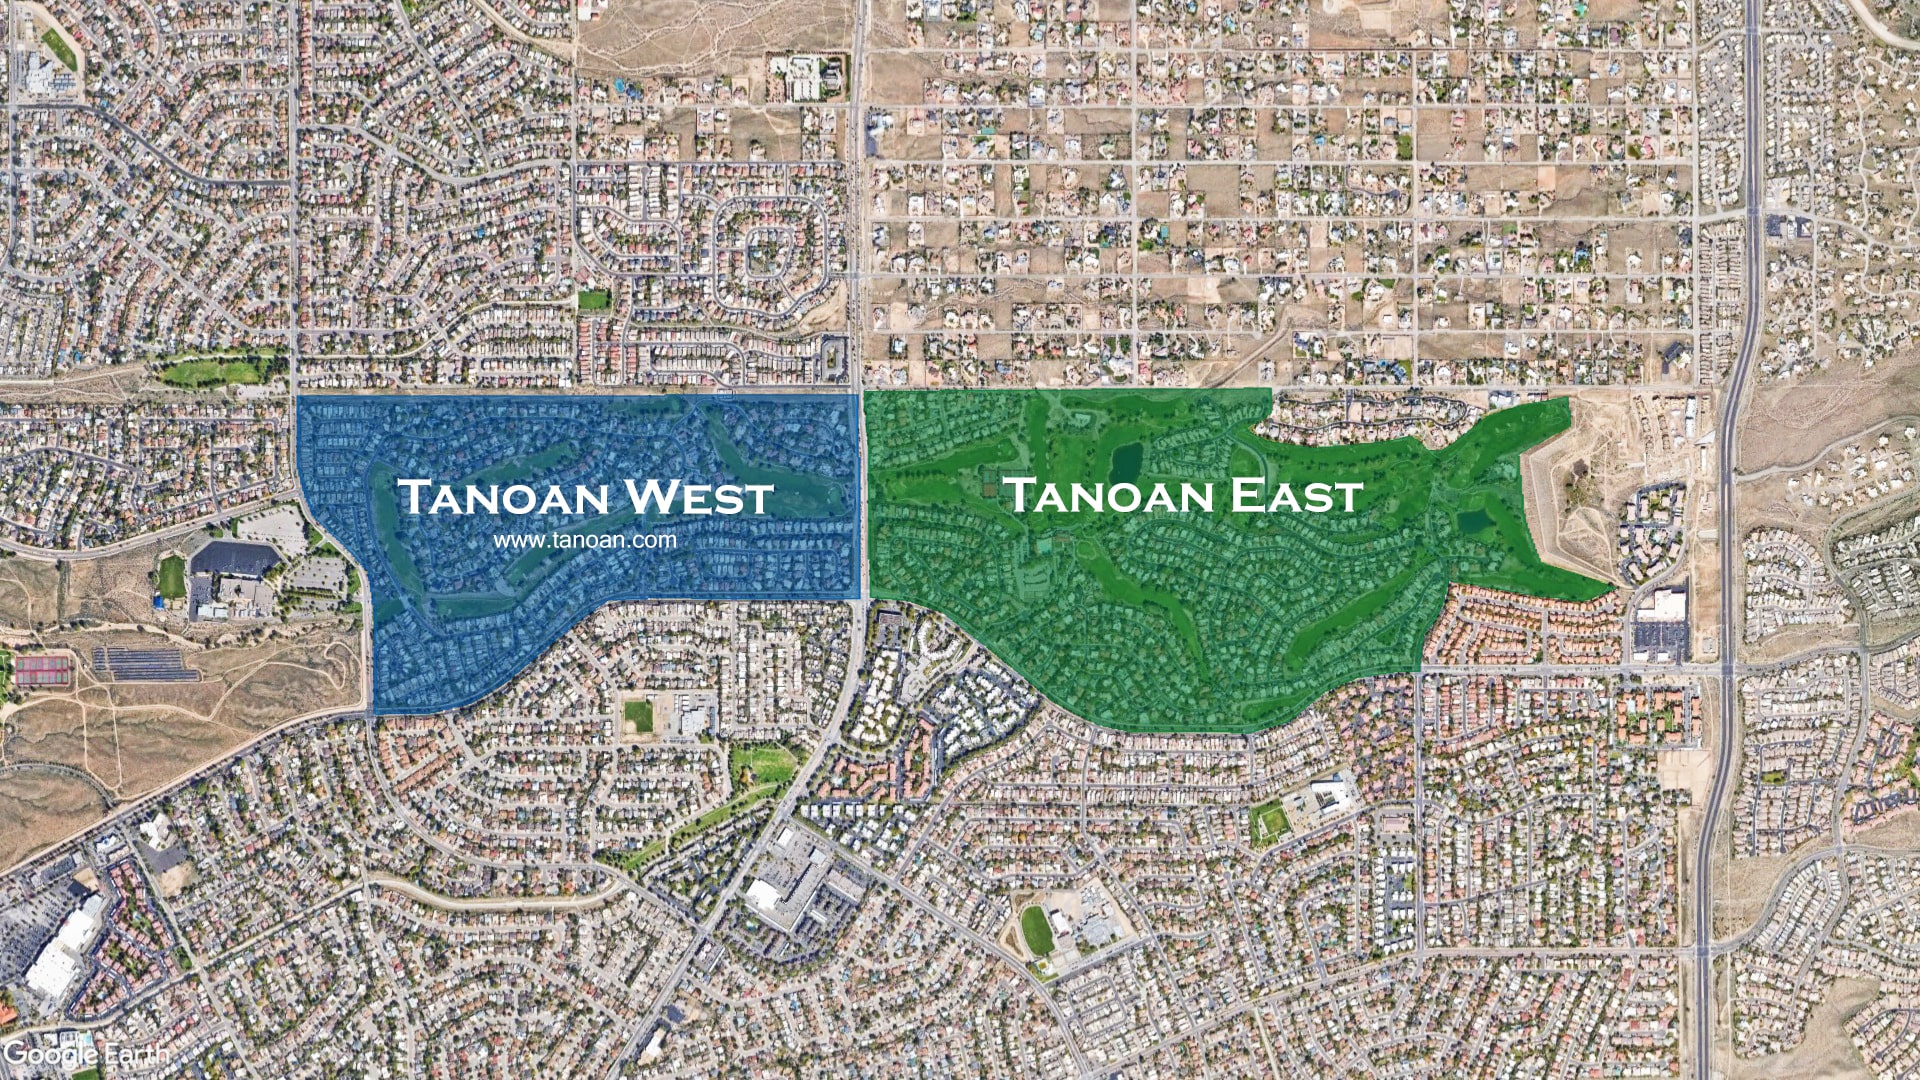 Satellite map of Tanoan West and Tanoan East